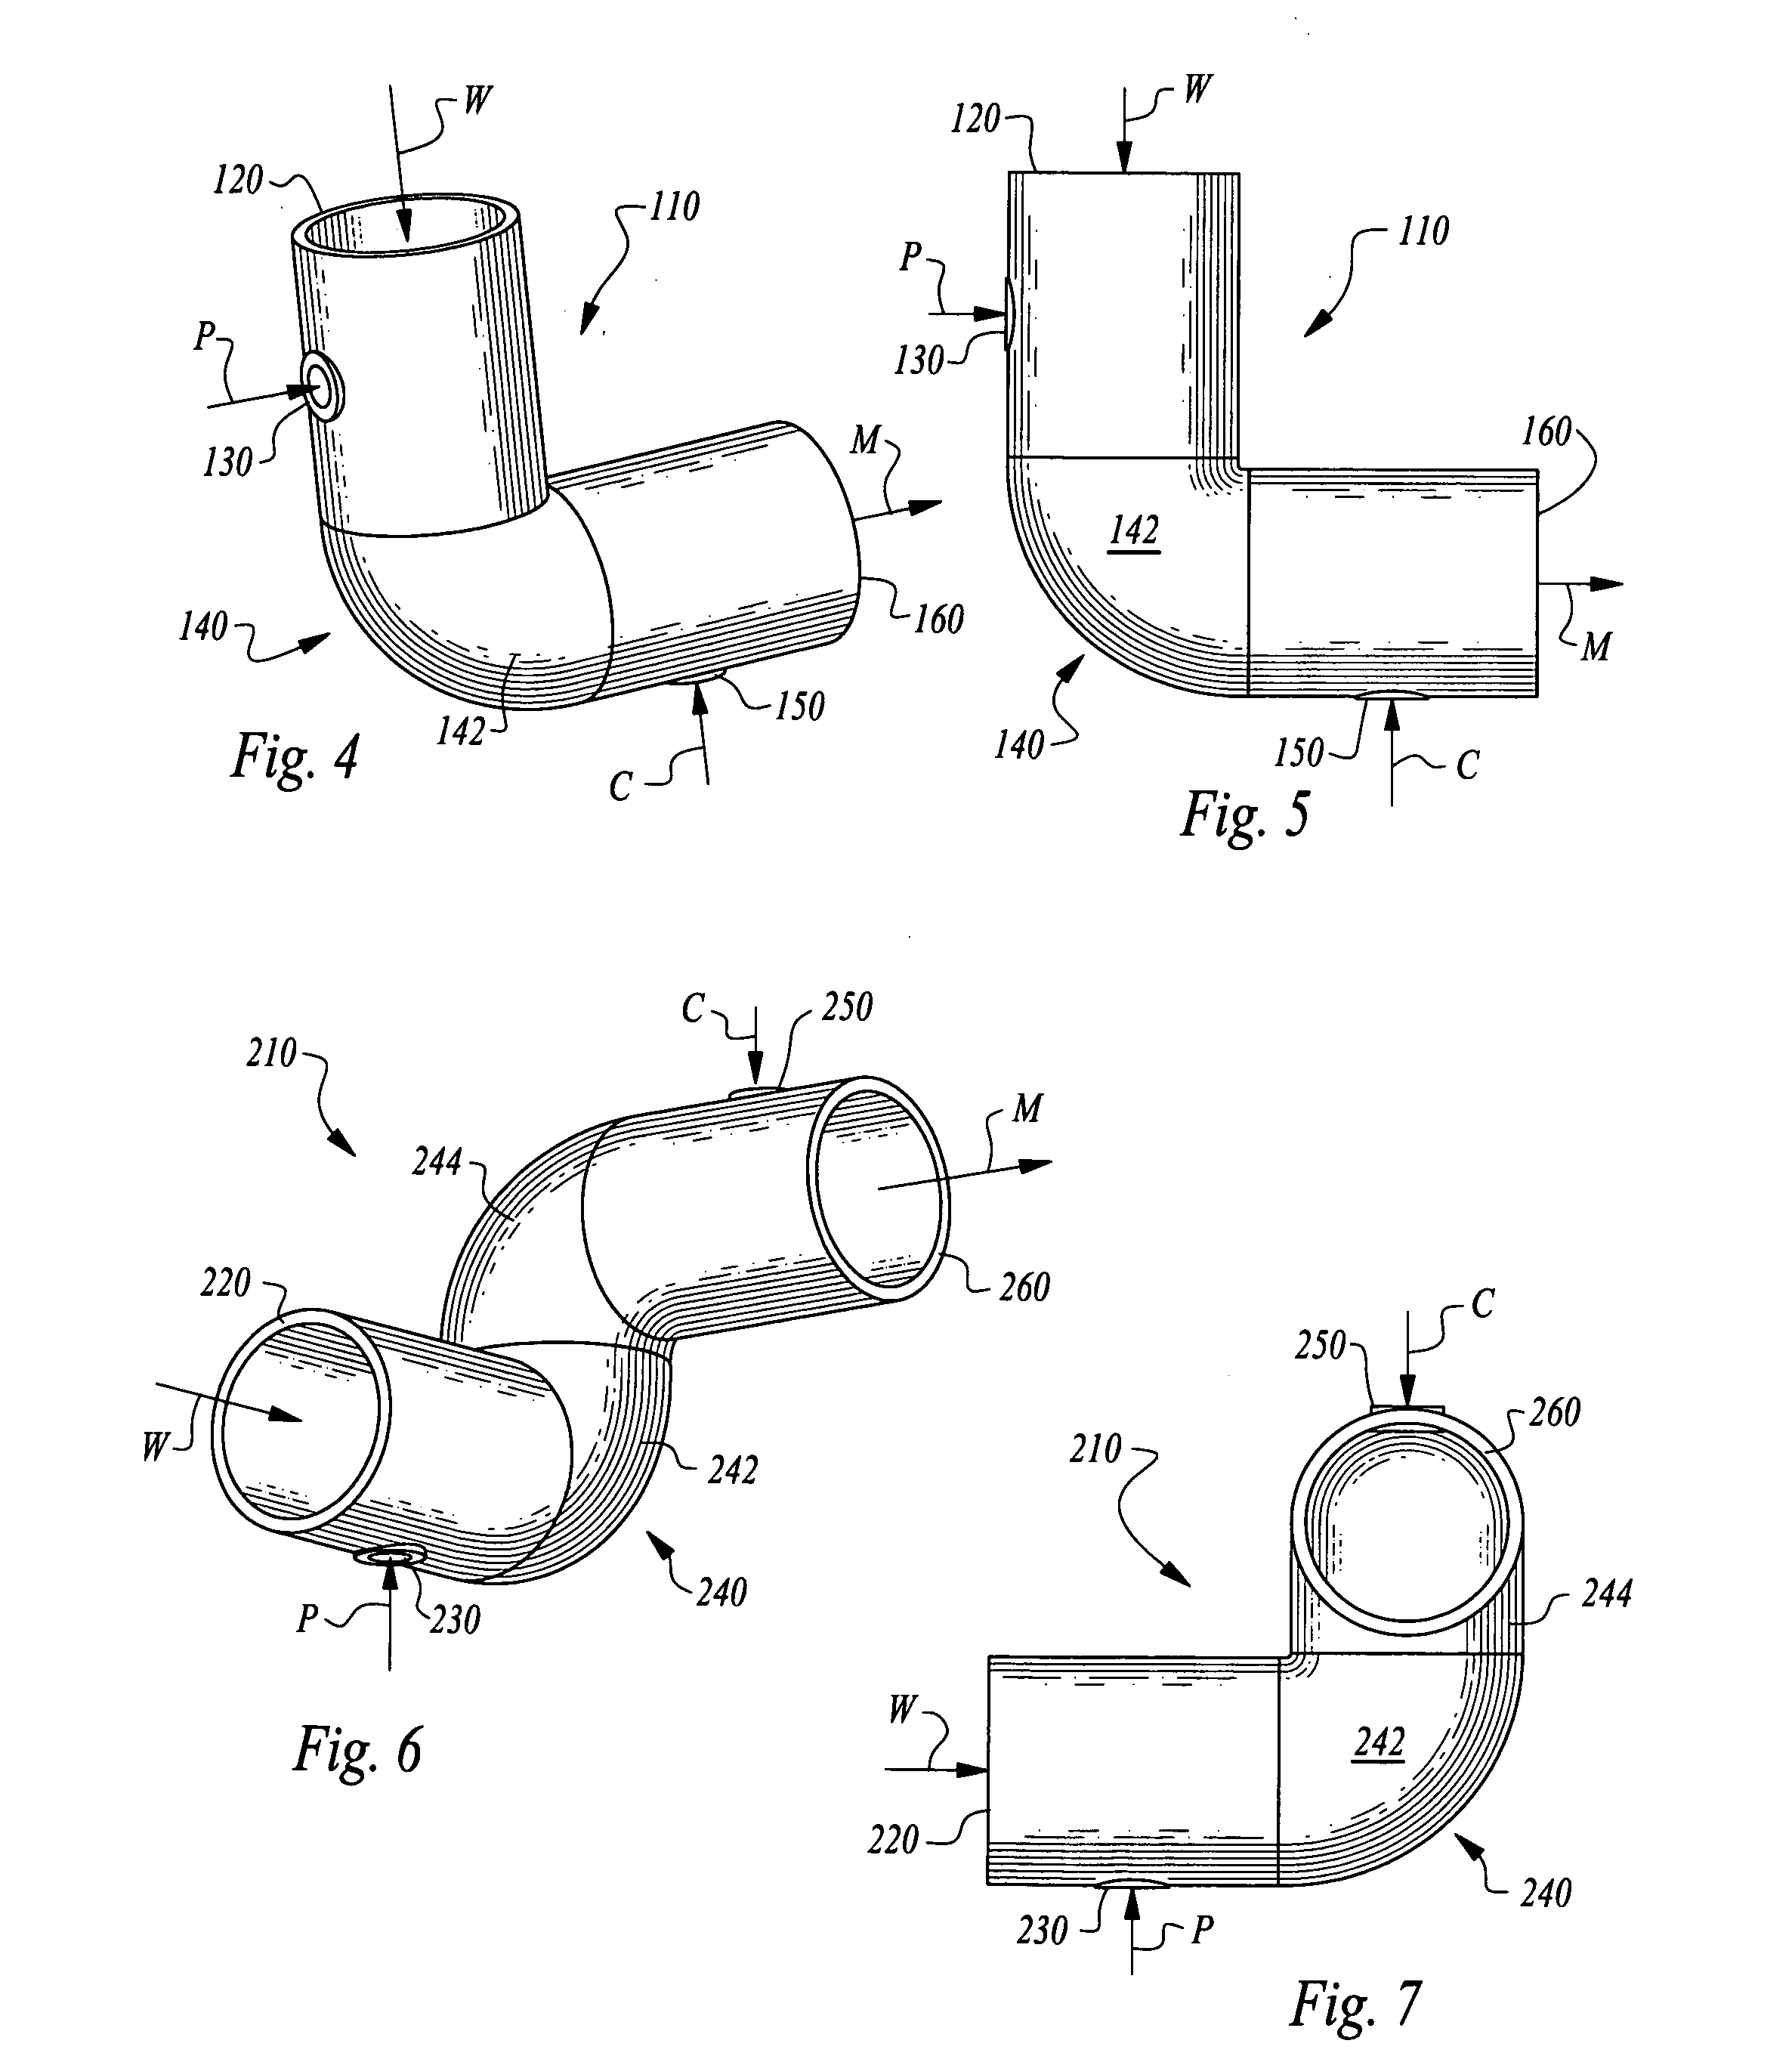 Polymer mixer powered by hydrodynamic forces